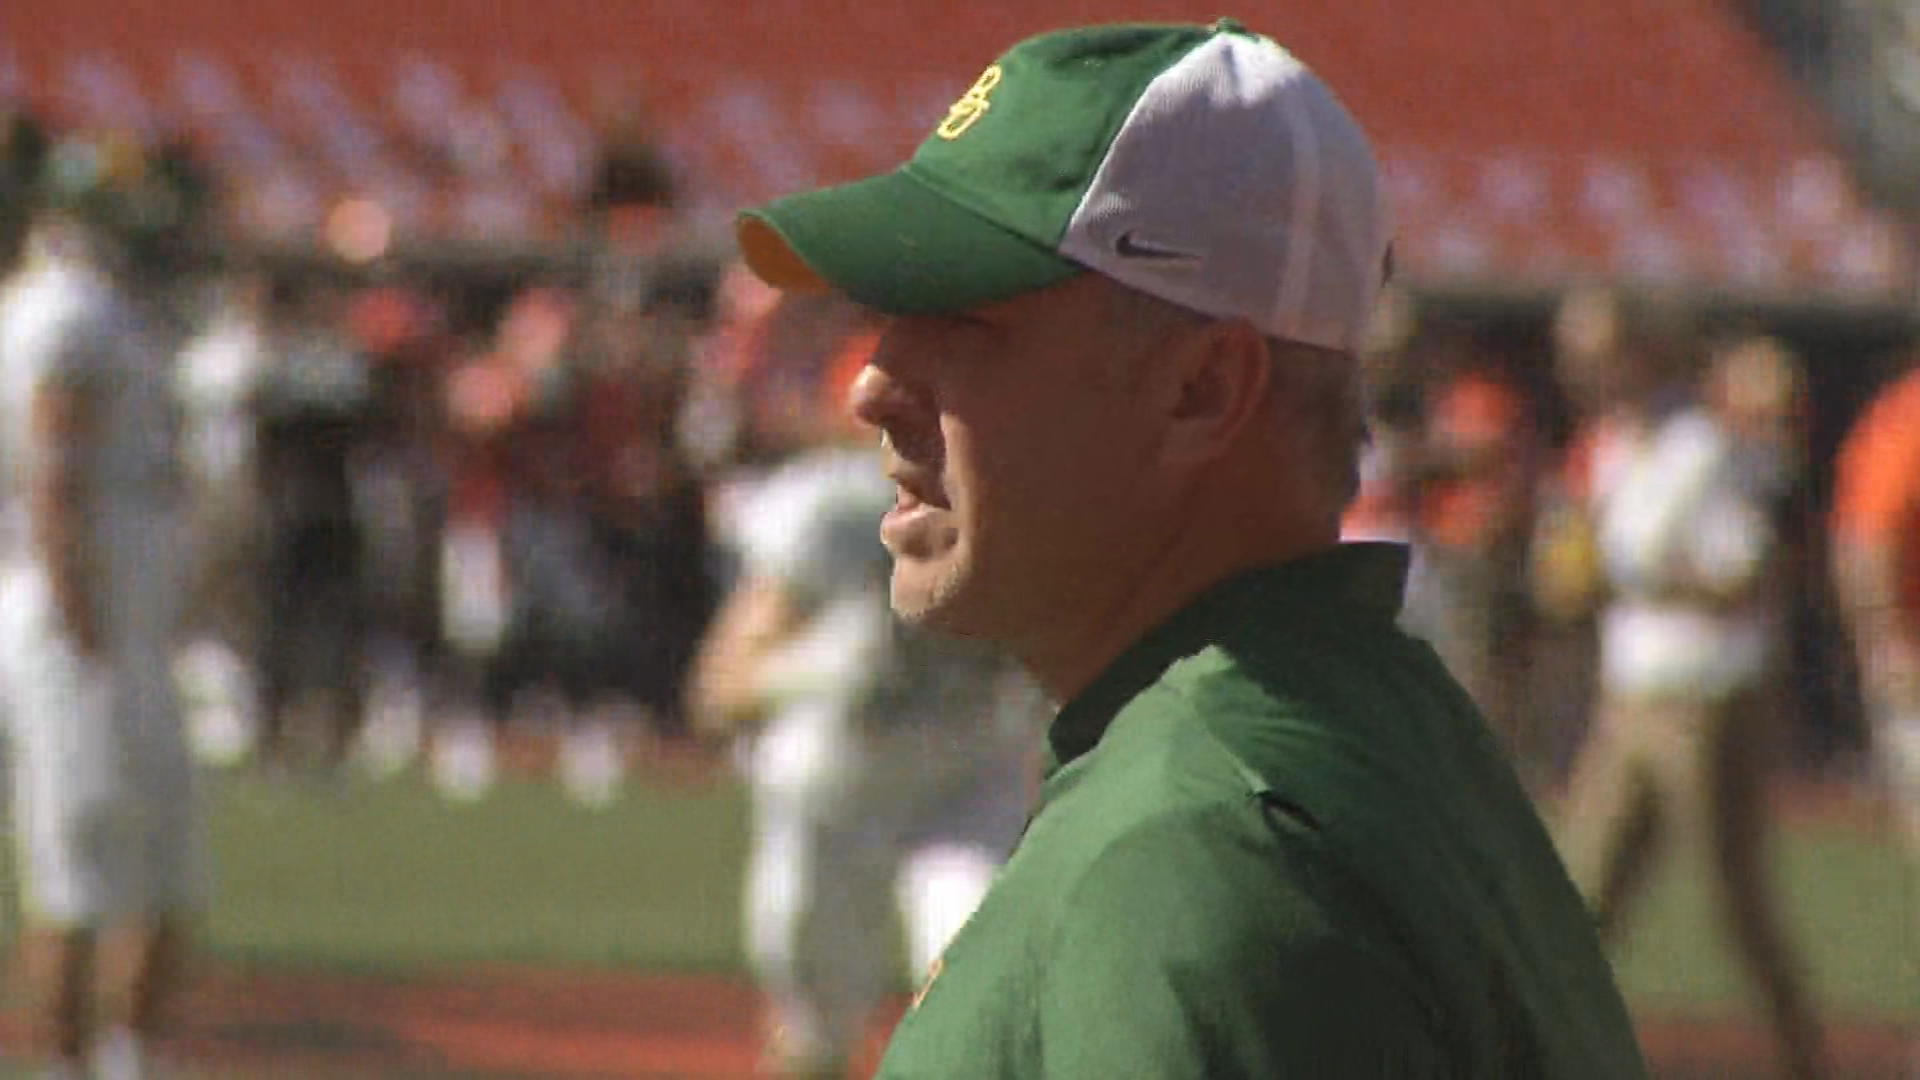 After three years in Waco, Baylor's head coach is headed to the NFL. Matt Rhule accepted the head coaching position with the Carolina Panthers.